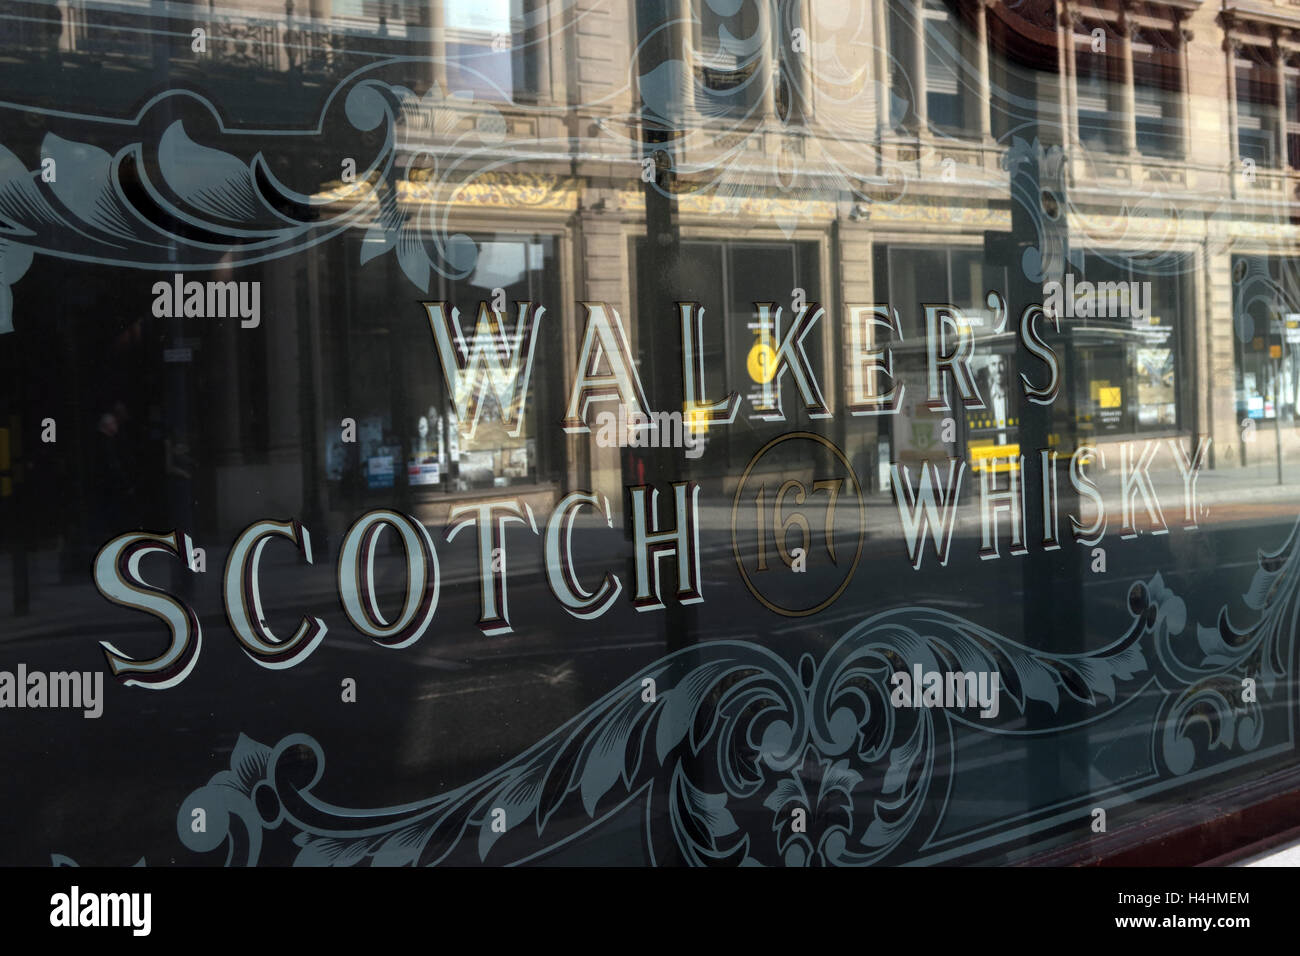 Walkers Scotch Whisky Window, in pub, reflecting a building, Liverpool, Merseyside, England , UK Stock Photo